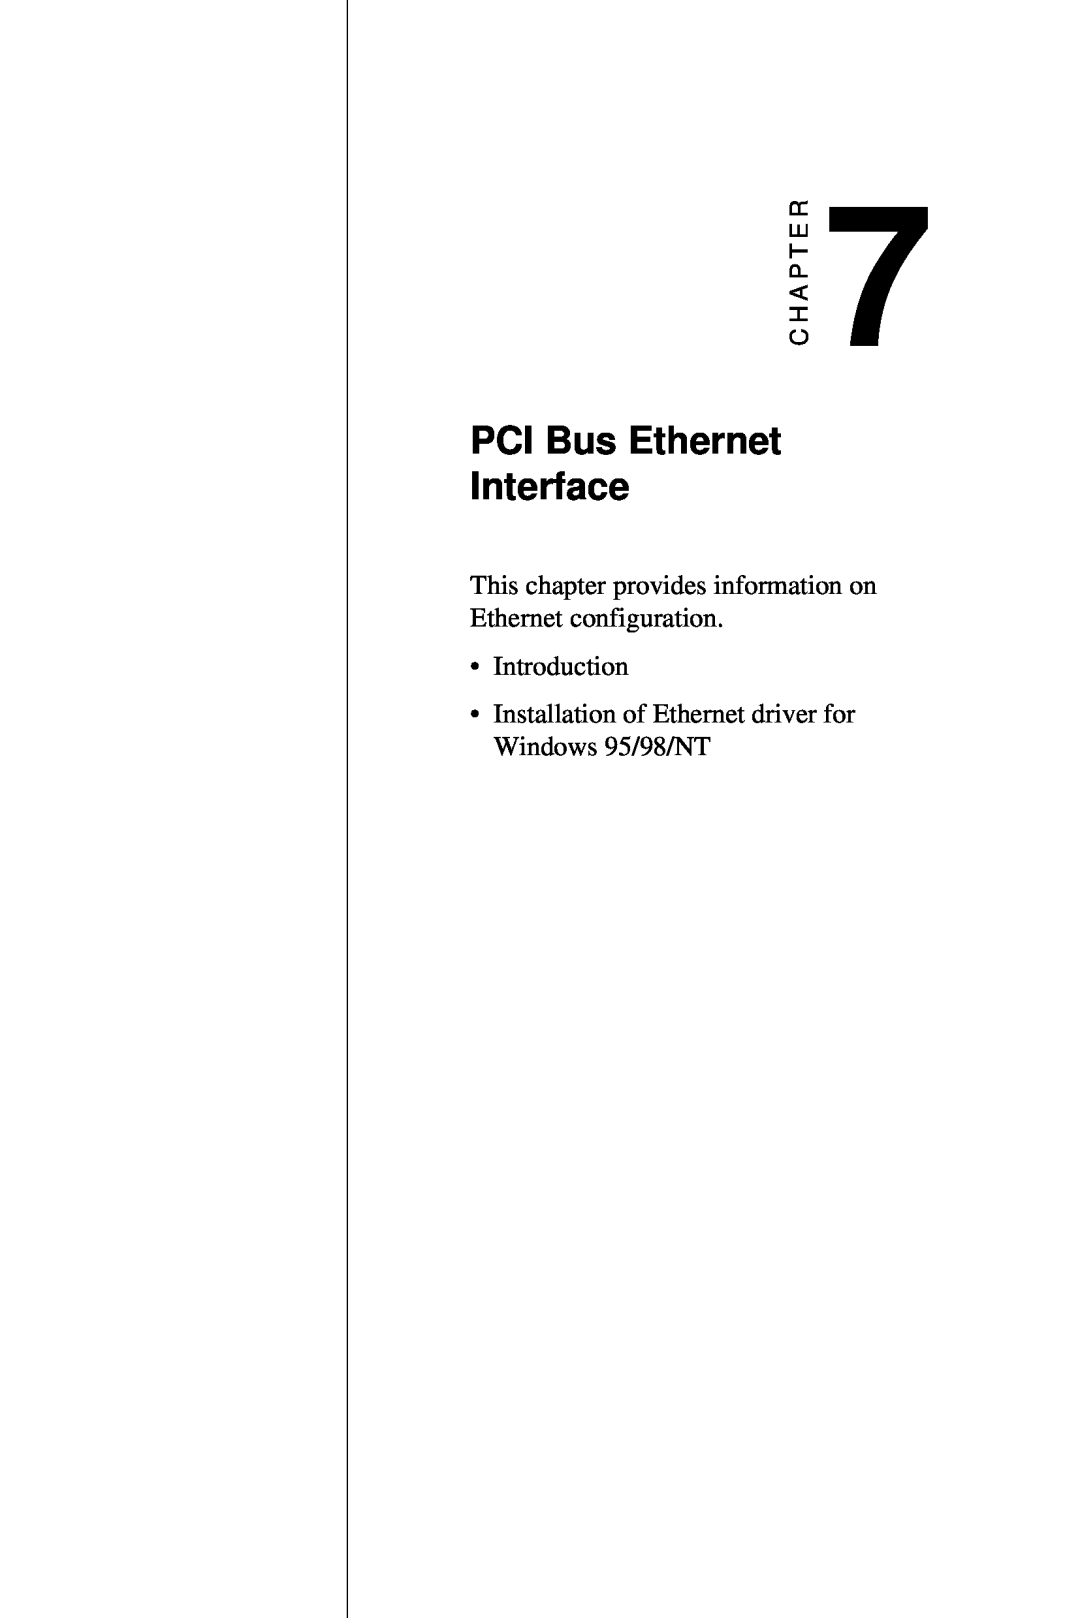 AMD PCM-5820 manual PCI Bus Ethernet Interface, This chapter provides information on Ethernet configuration 